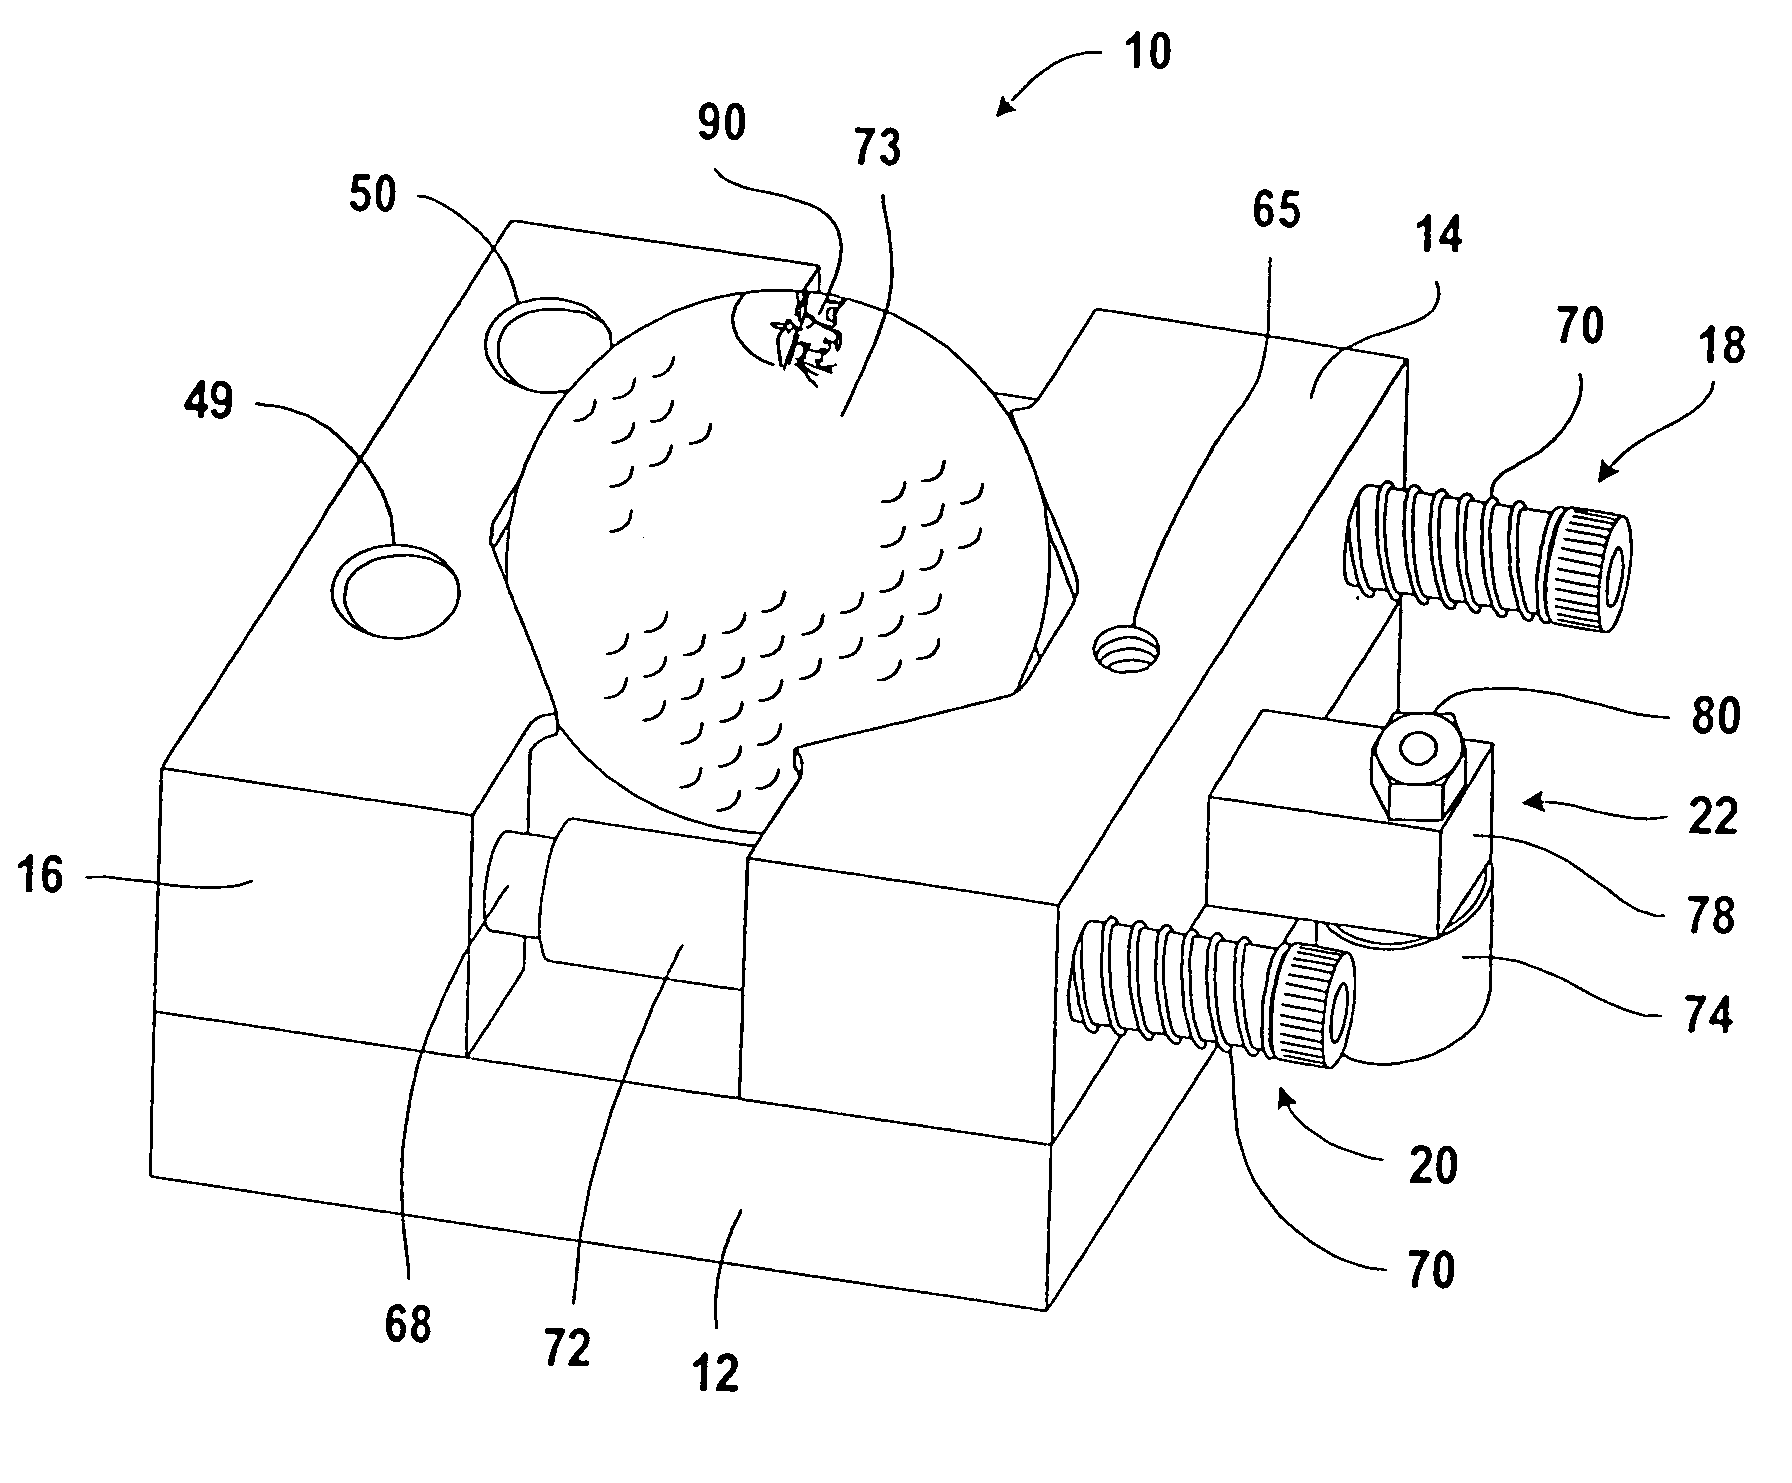 Device for holding objects to be treated